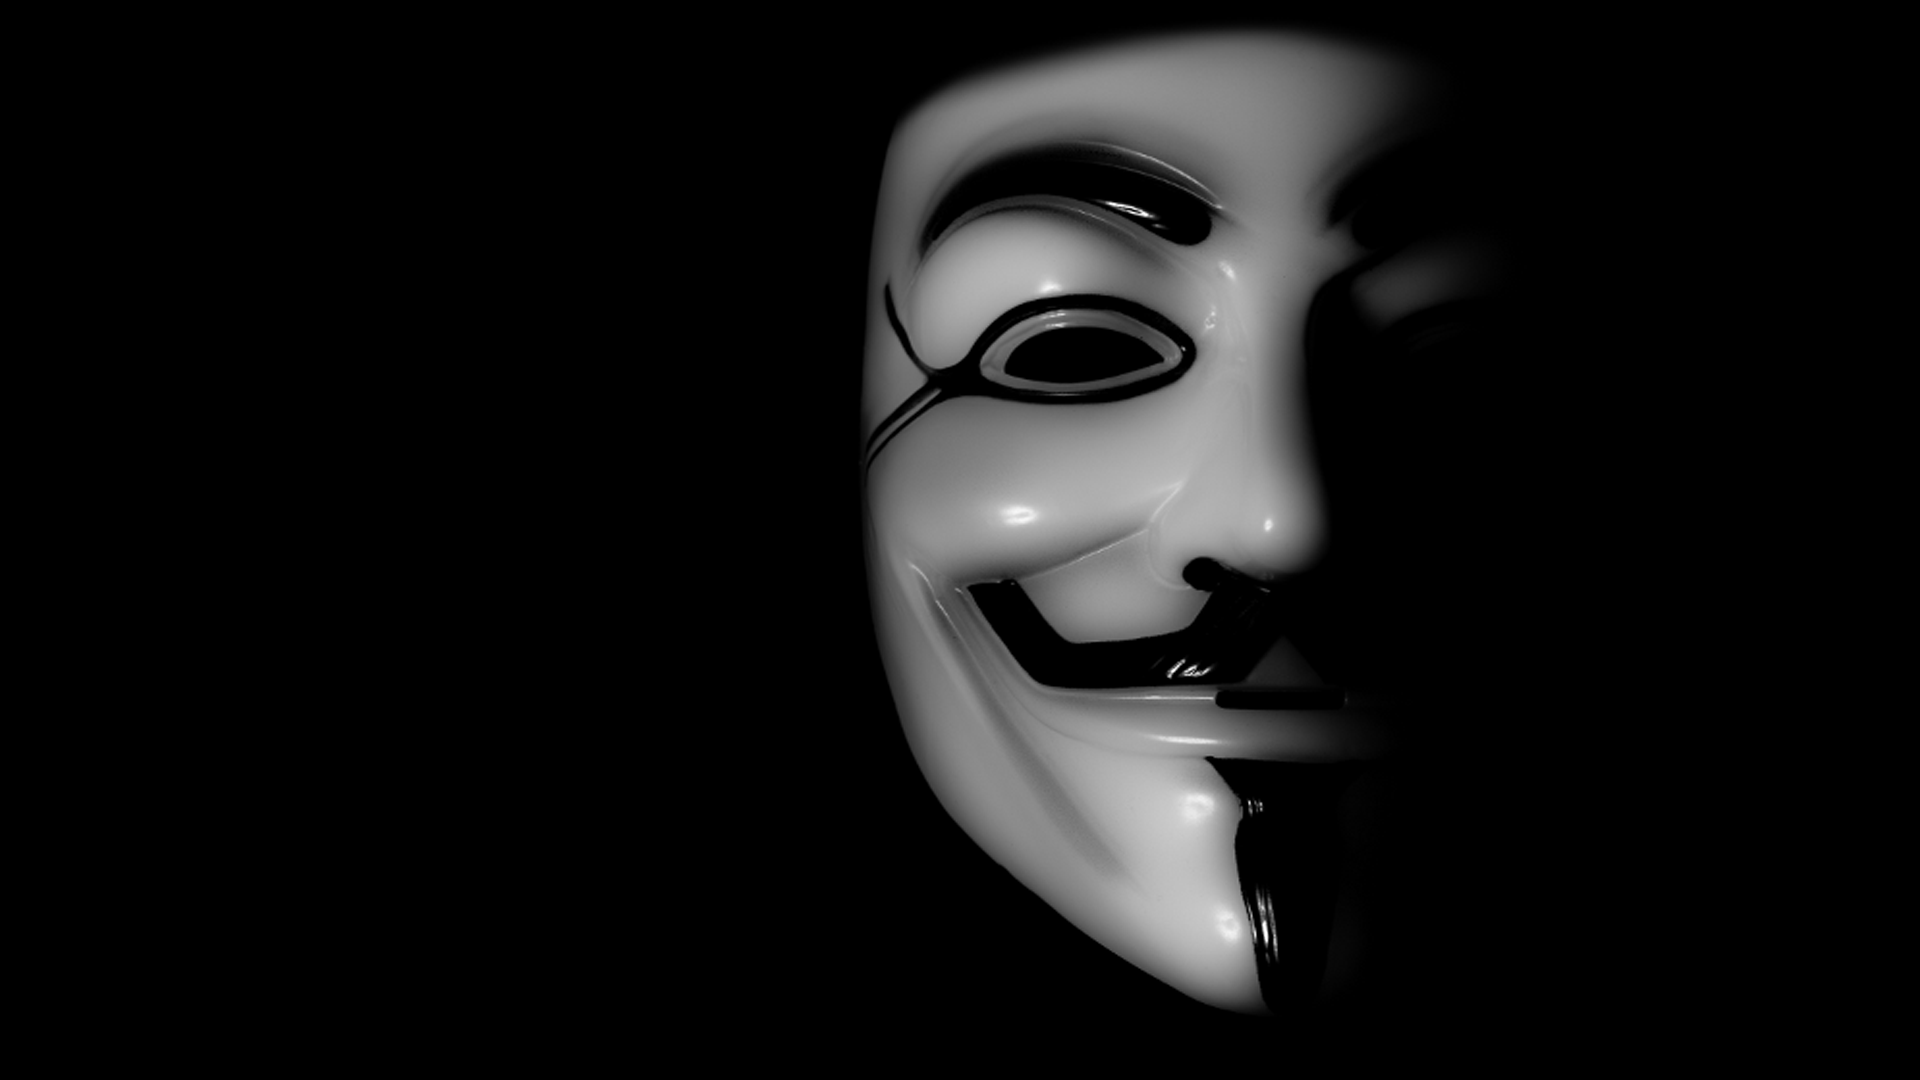 anonymous wallpaper 1920x1080,face,head,masque,nose,black and white